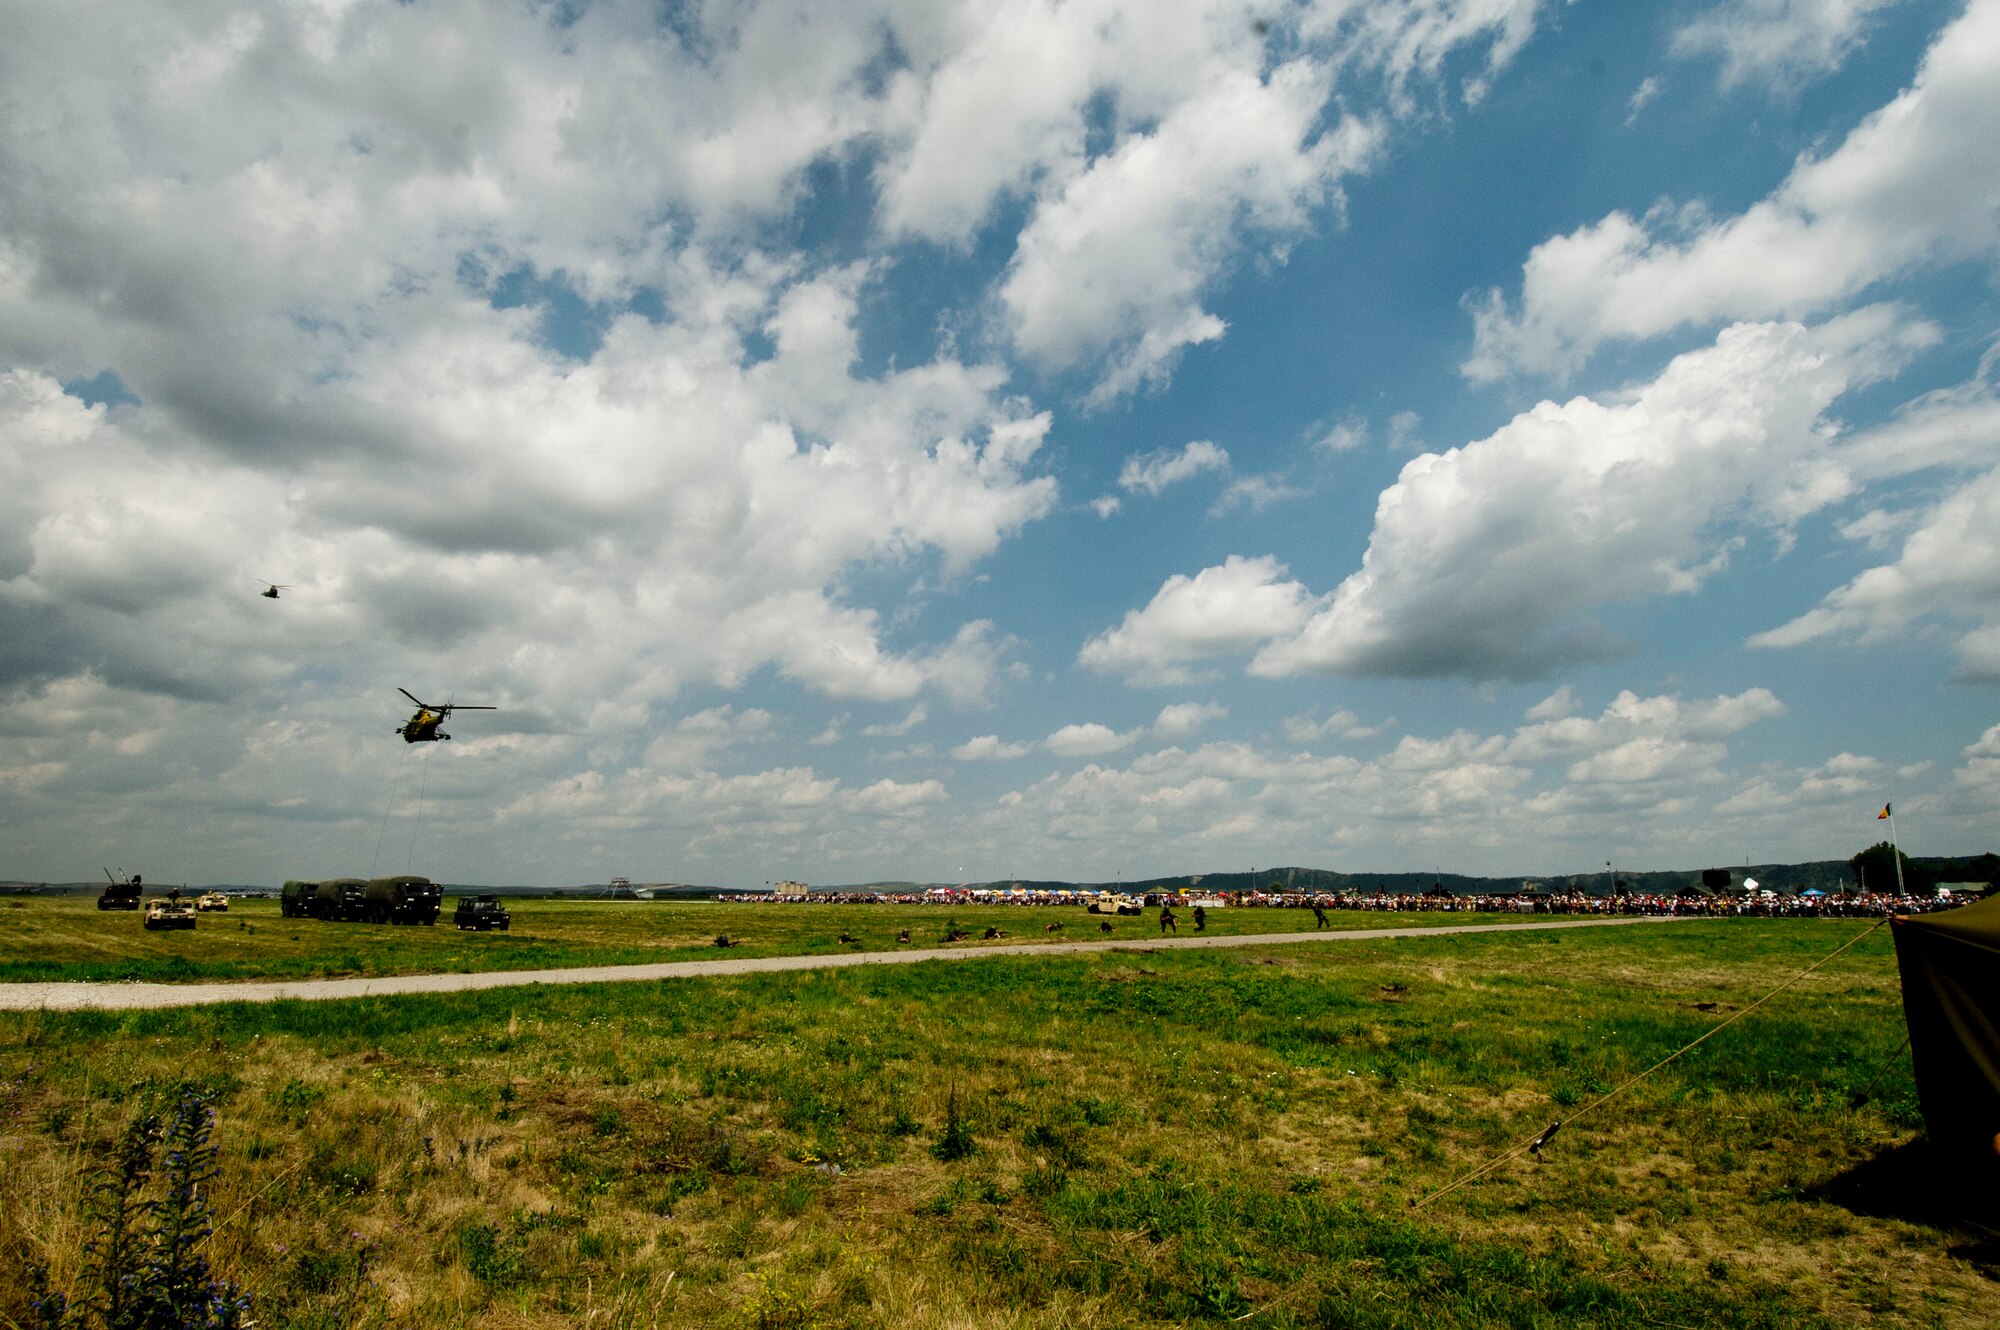 Romanian armed forces helicopters, soldiers, tanks and vehicles participate in a simulated combat and rescue scenario during the Romanian air force's 71st Air Base's air show and open house at Campia Turzii, Romania, July 23, 2016. The aviation demonstration took place during the middle of the U.S. Air Force's 194th Expeditionary Fighter Squadron's six-month long theater security package deployment to Europe in support of Operation Atlantic Resolve, which aims to bolster the U.S.'s continued commitment to the collective security of NATO and dedication to the enduring peace and stability in the region. The unit, comprised of more than 200 CANG Airmen from the 144th Fighter Wing at Fresno ANG Base, Calif., as well as U.S. Air Force Airmen from the 52nd Fighter Wing at Spangdahlem Air Base, Germany, piloted, maintained and supported the deployment of 12 F-15Cs Eagle fighter aircraft throughout nations like Romania, Iceland, the United Kingdom, the Netherlands, Estonia and among others. The F-15Cs took to the skies alongside the 71st AB's MiG-21 fighter aircraft and Puma helicopters for both the airshow, the second engagement of its kind at Campia Turzii under Operation Atlantic Resolve, and the bilateral flight training, also known as Dacian Eagle 2016. (U.S. Air Force photo by Staff Sgt. Joe W. McFadden/Released)